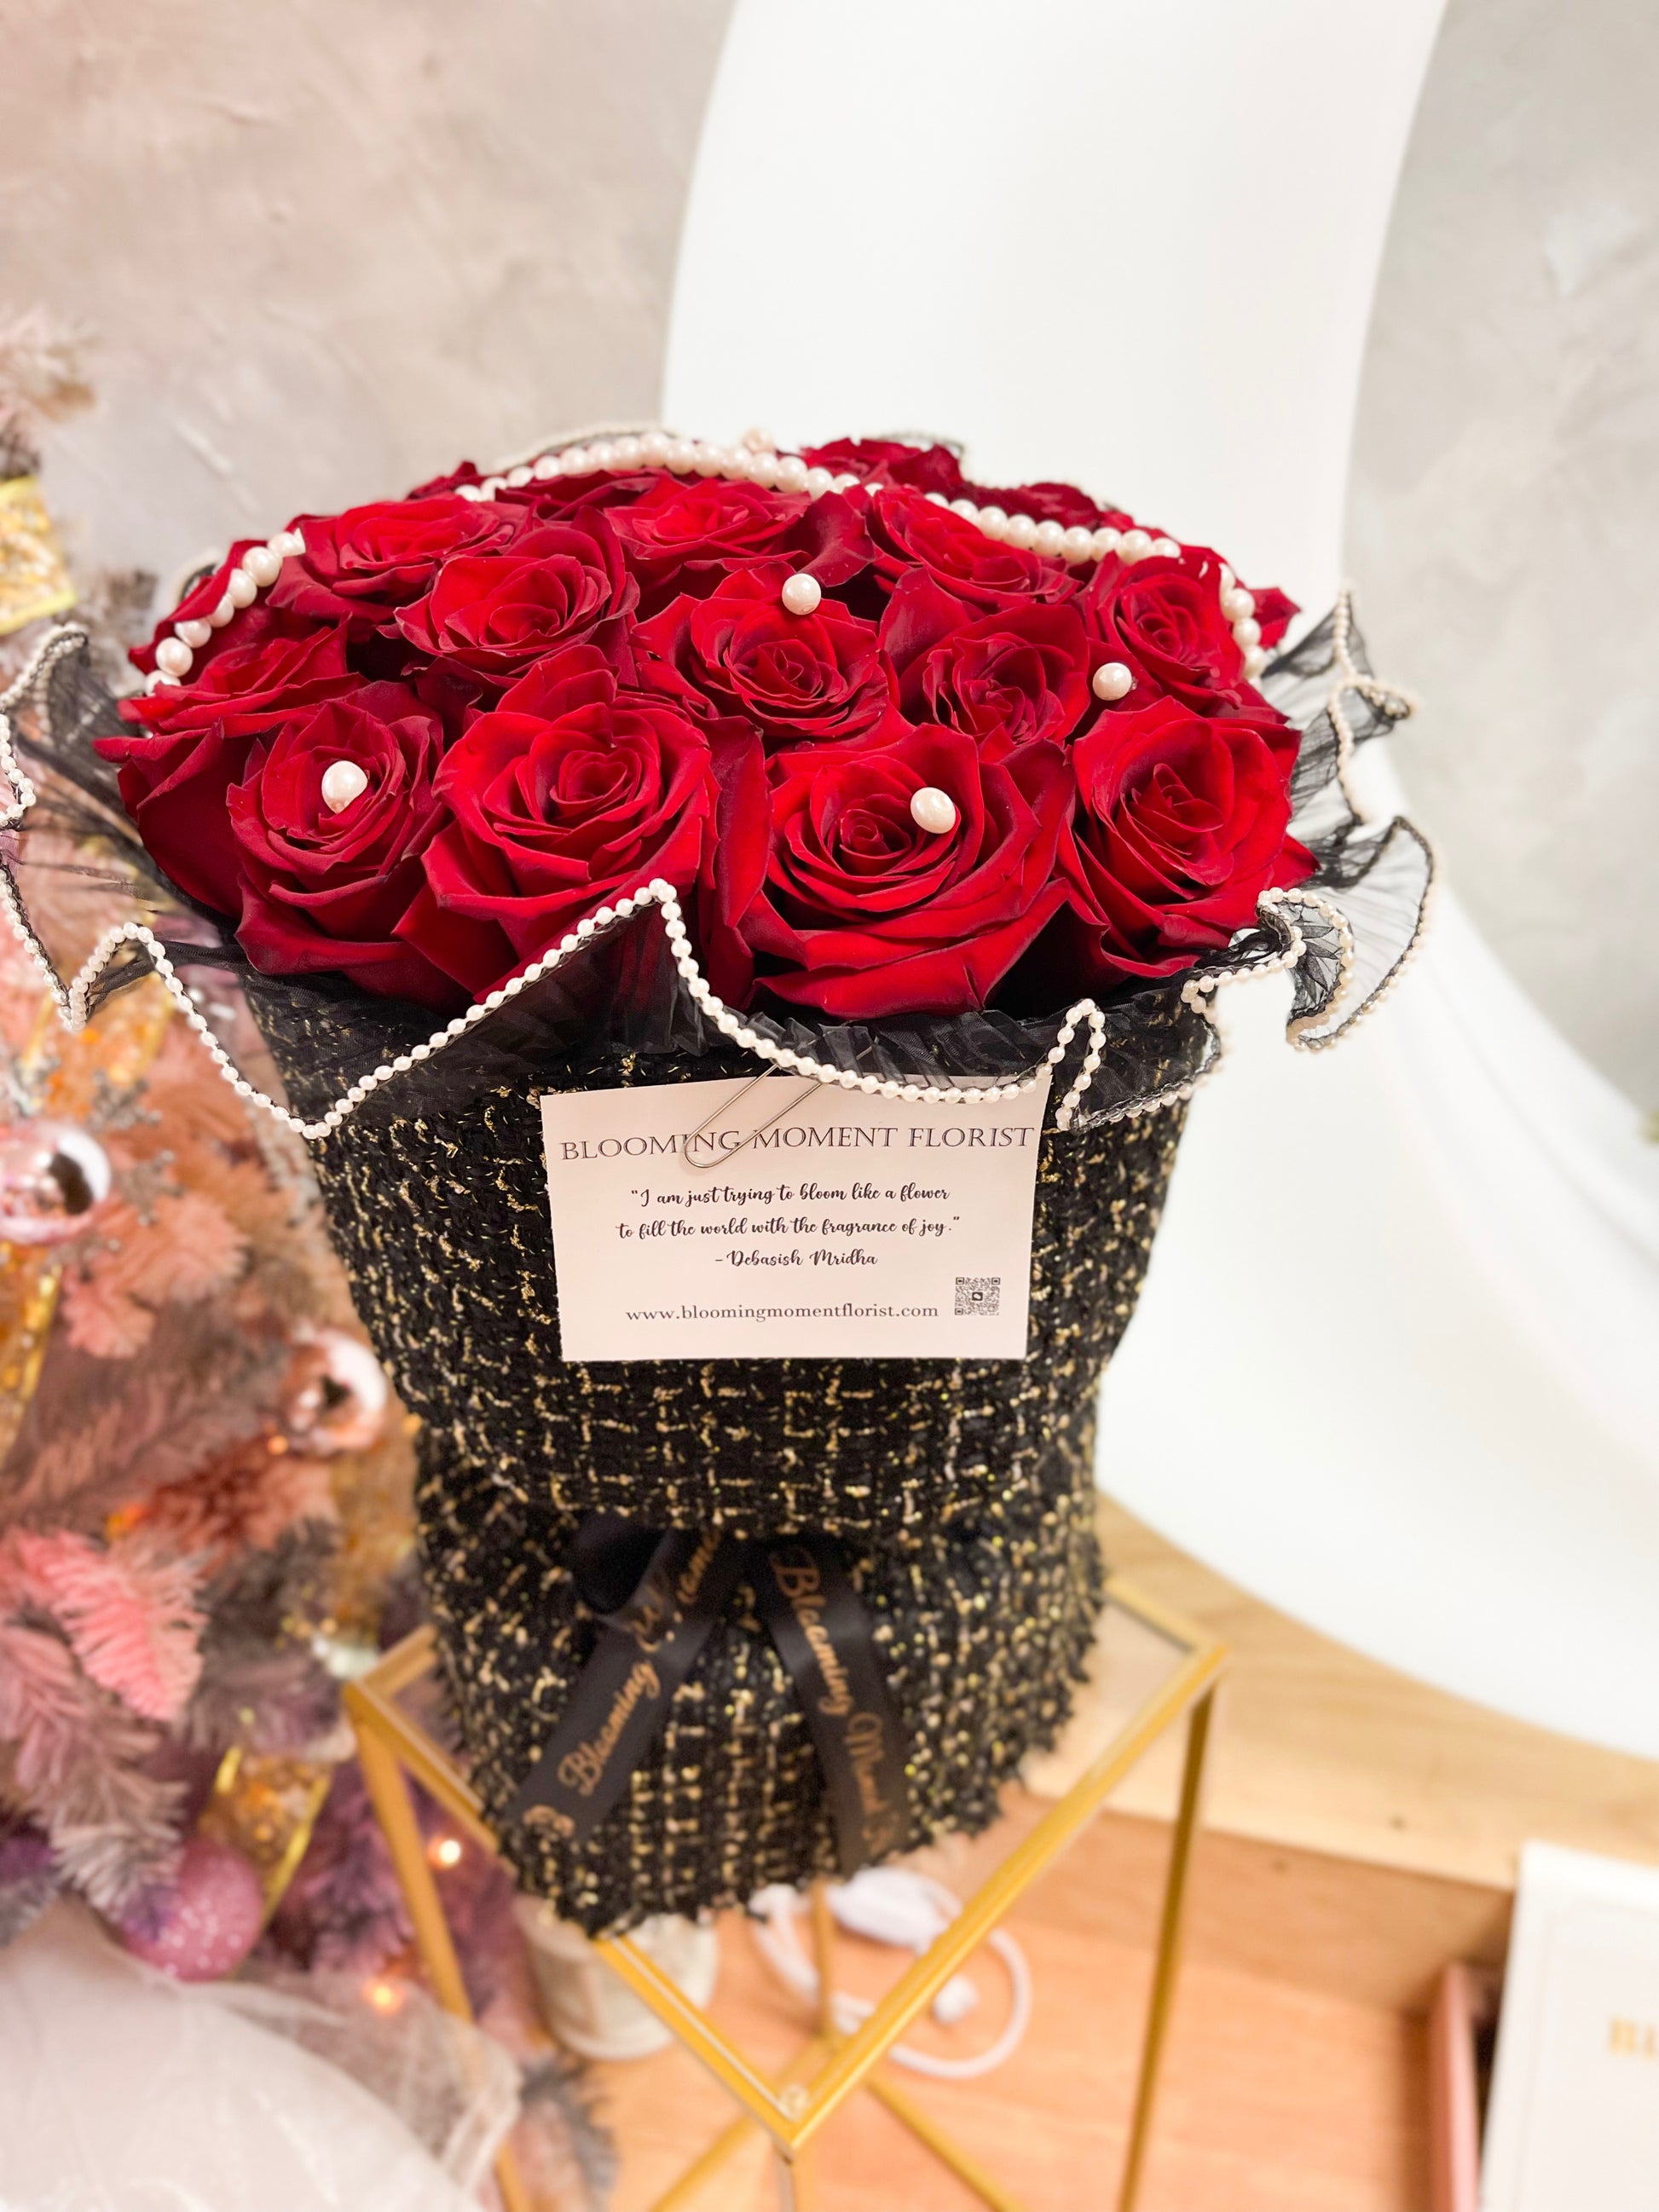 FRESH FLOWER] Chanel Style Red Rose bouquet – Blooming Moment Florist